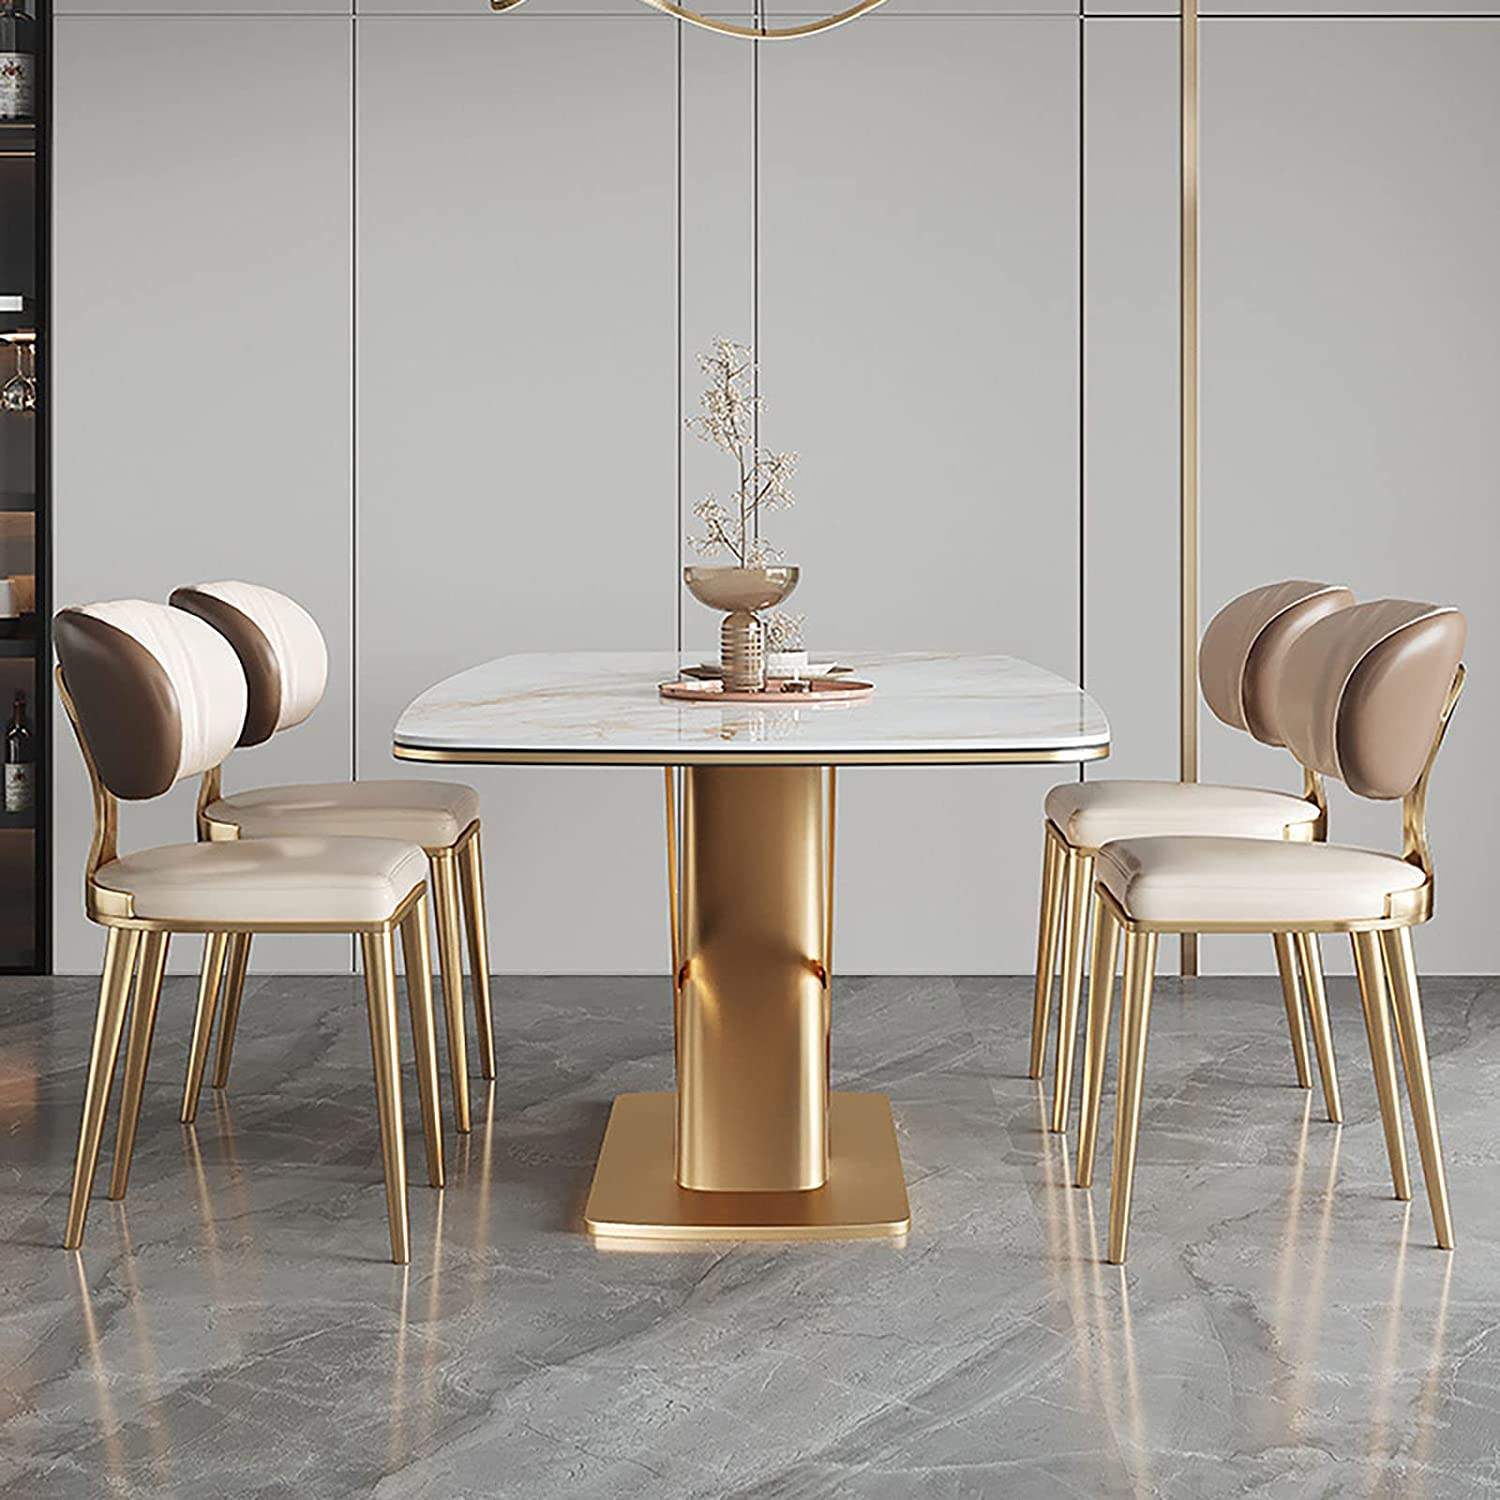 Luxury Stainless Steel Gold Frame Dining Chair Pu Leather